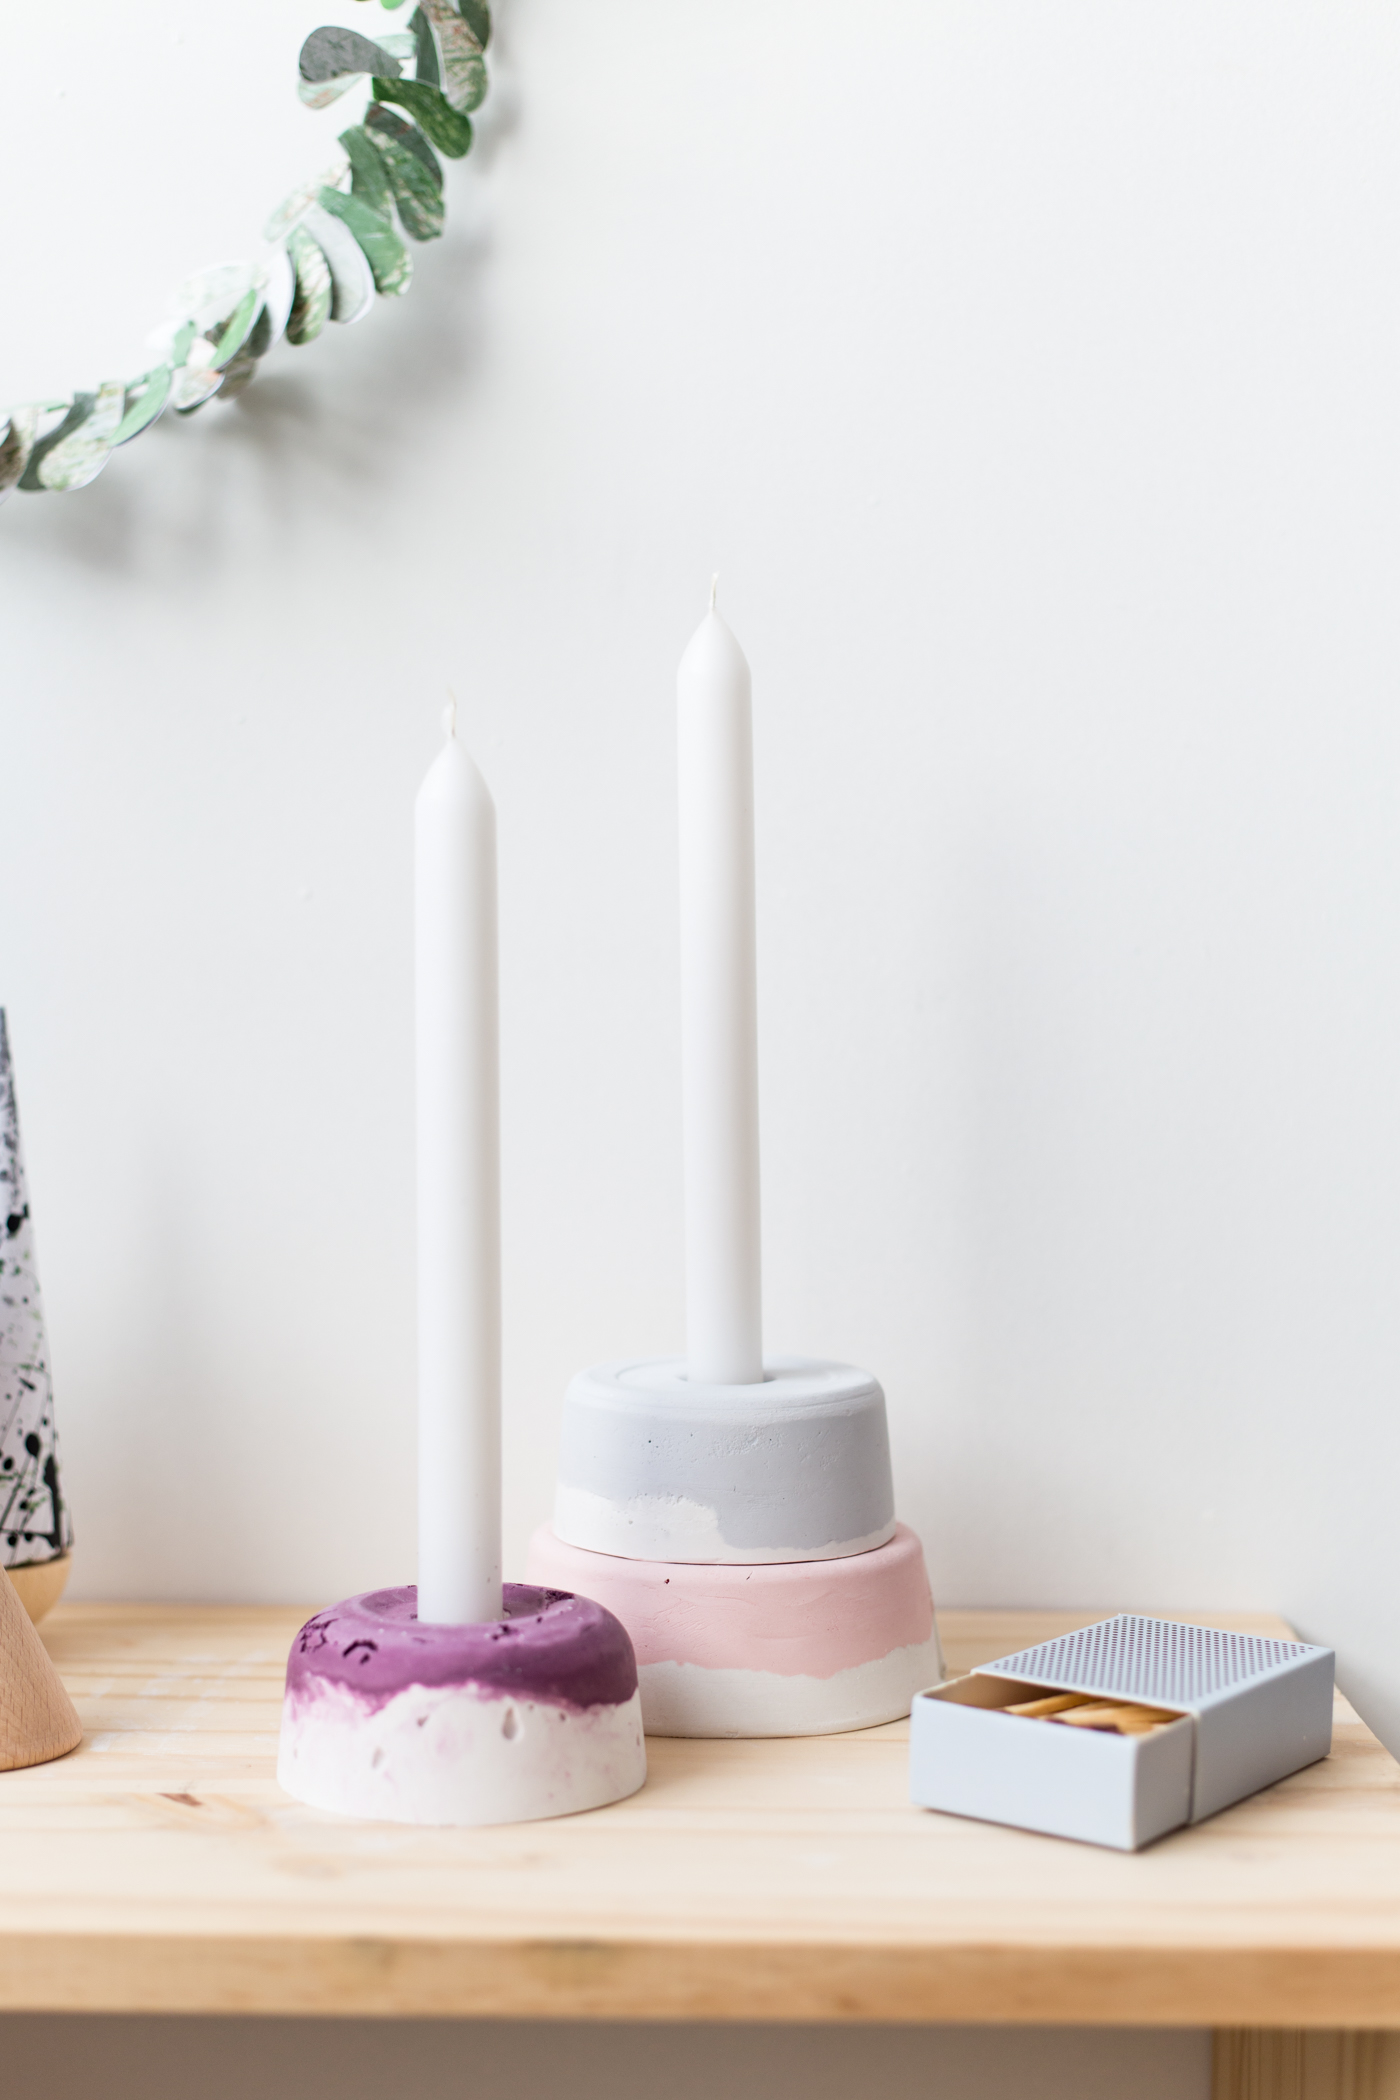 diy-dyed-plaster-candle-holders-with-dulux-fallfordiy-2